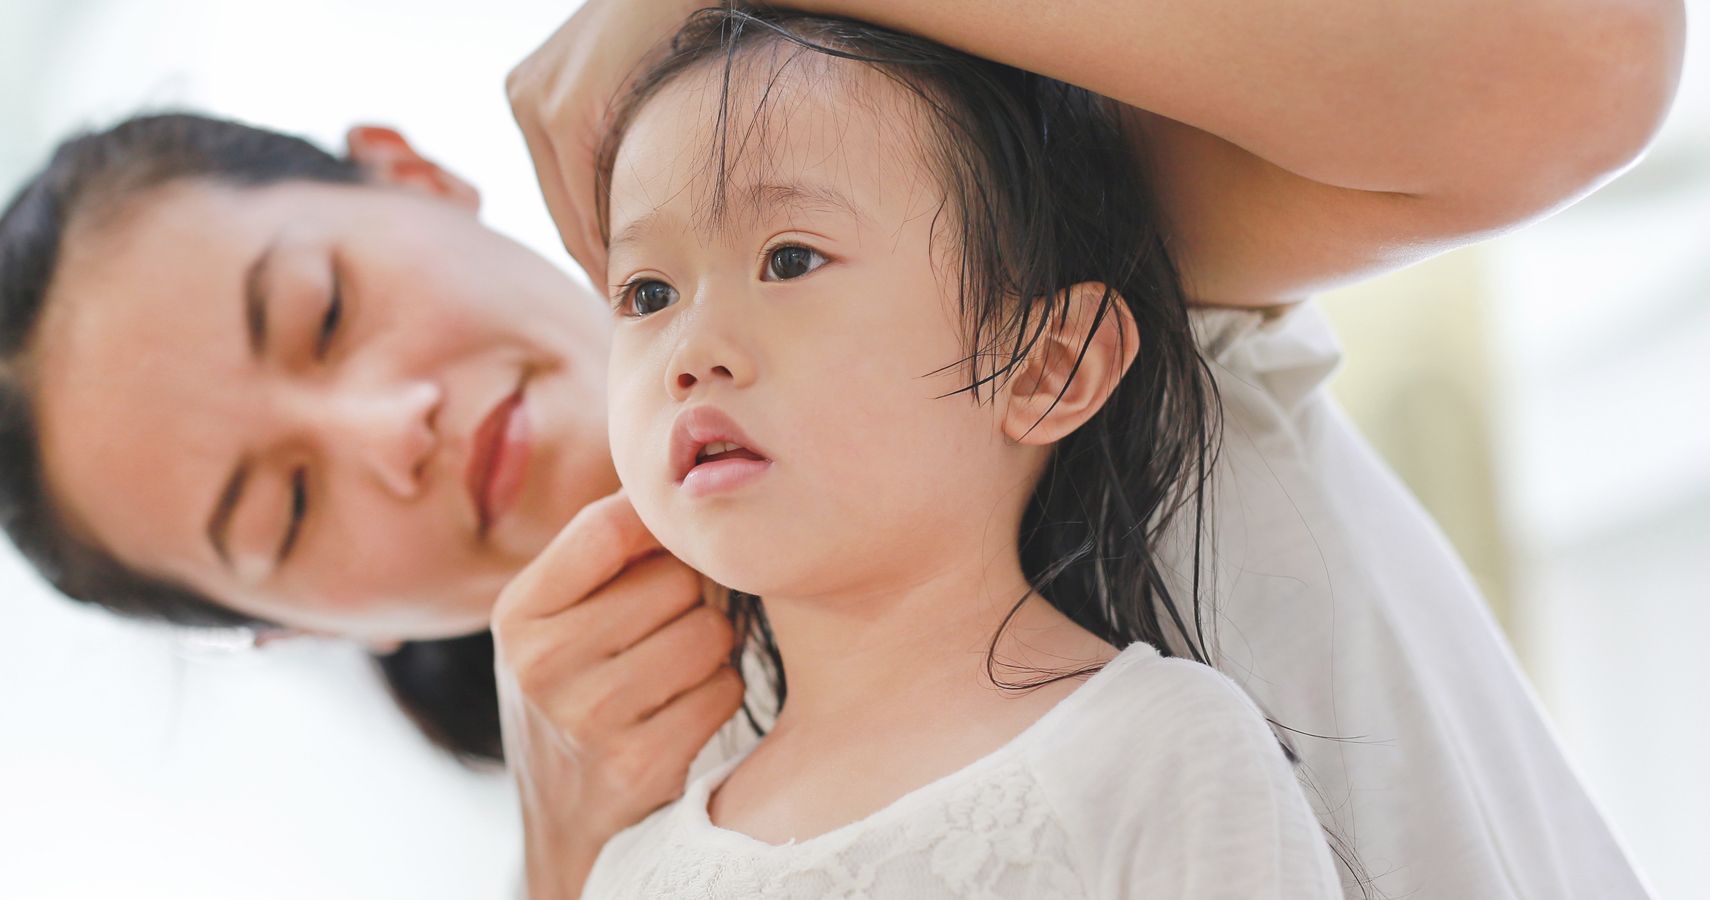 The Ins & Outs Of Cleaning Kids’ Ears